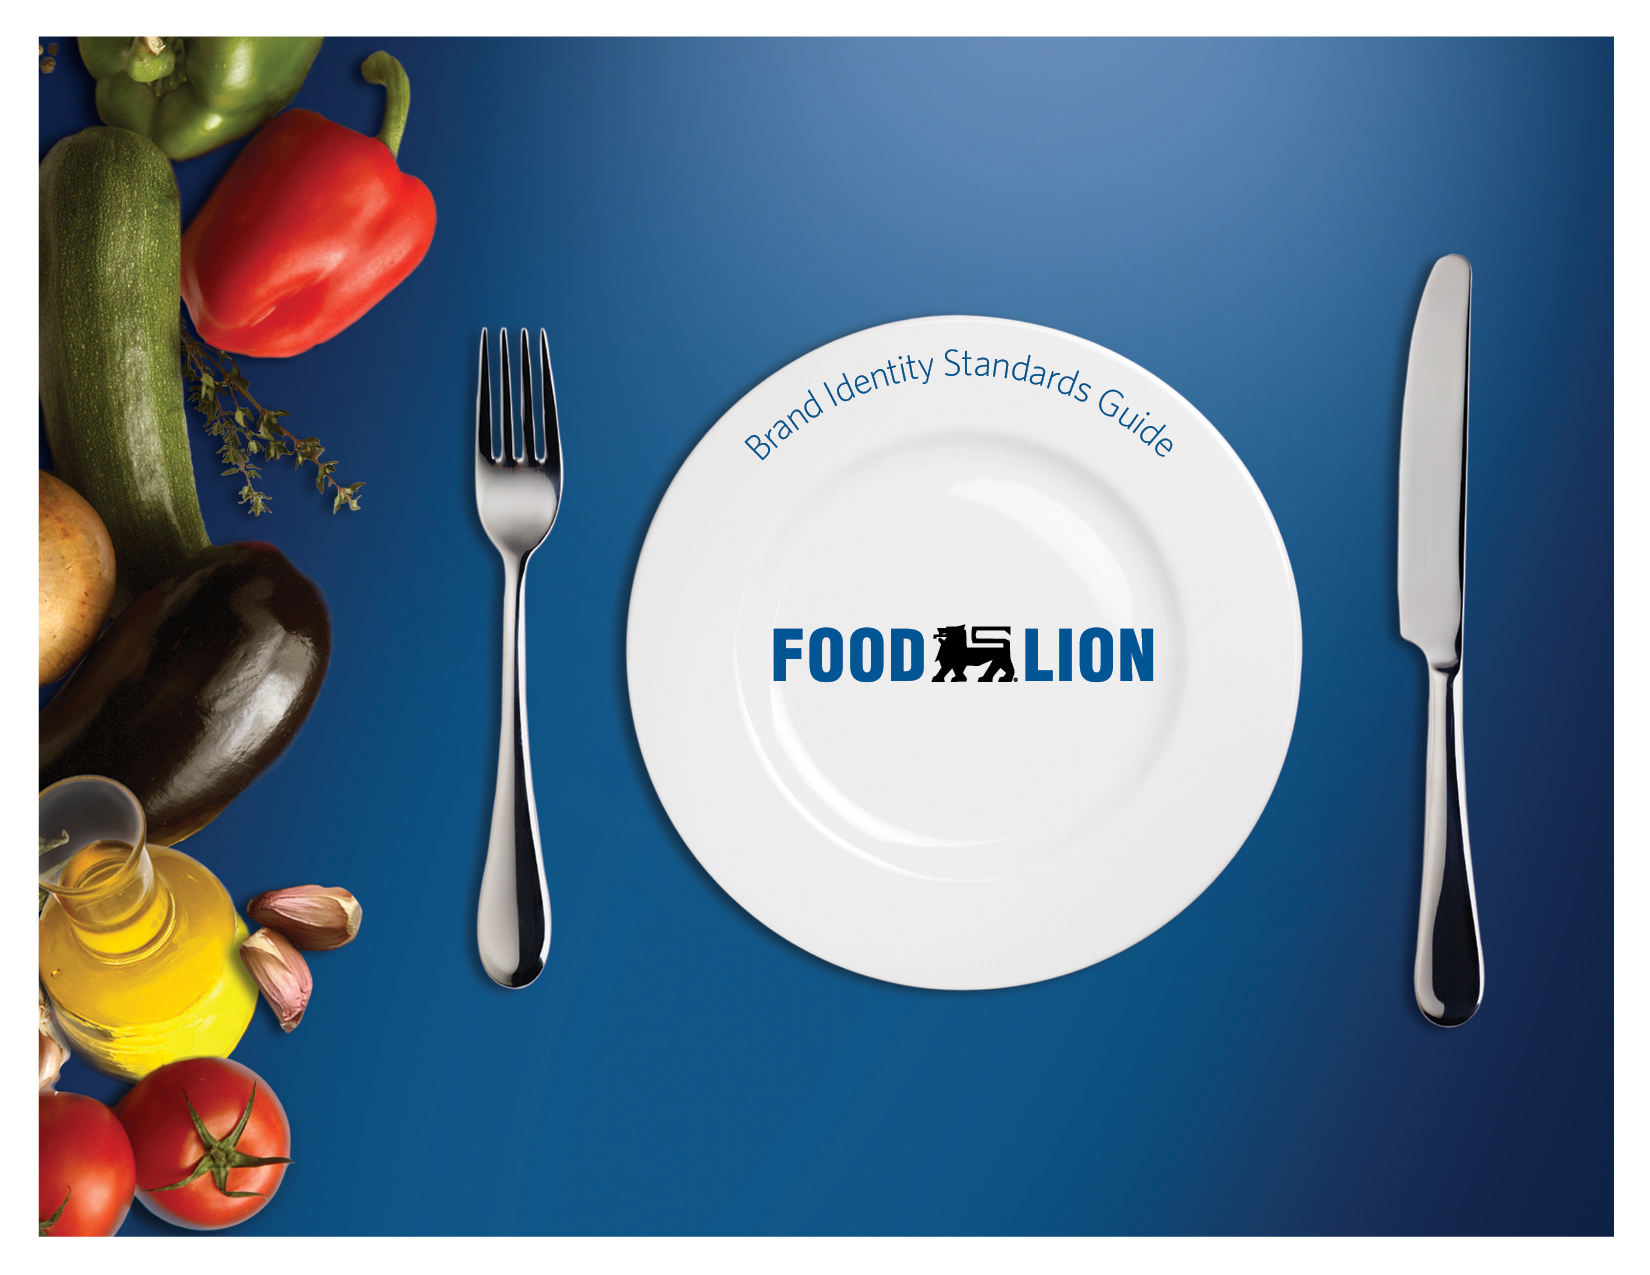 Food Lion Brand Identity Standards Guide